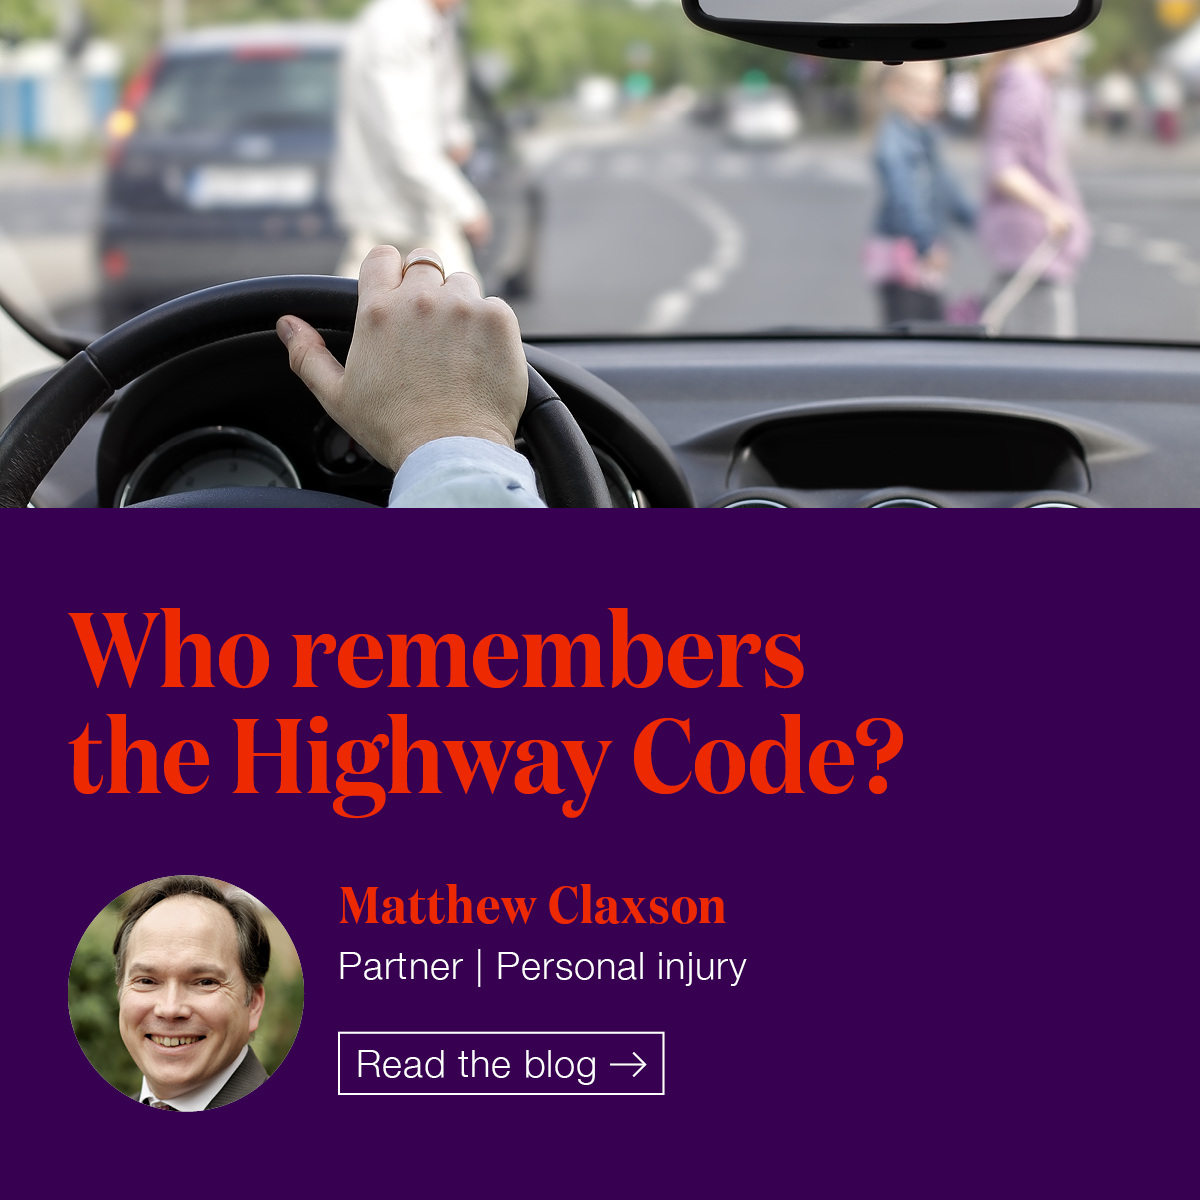 Who remembers the Highway Code? Since getting our drivers license, how many of us can say we have picked up a copy of the Highway Code to refresh our skills? hubs.ly/Q02vv7Qt0 #HighwayCode #PersonalInjury